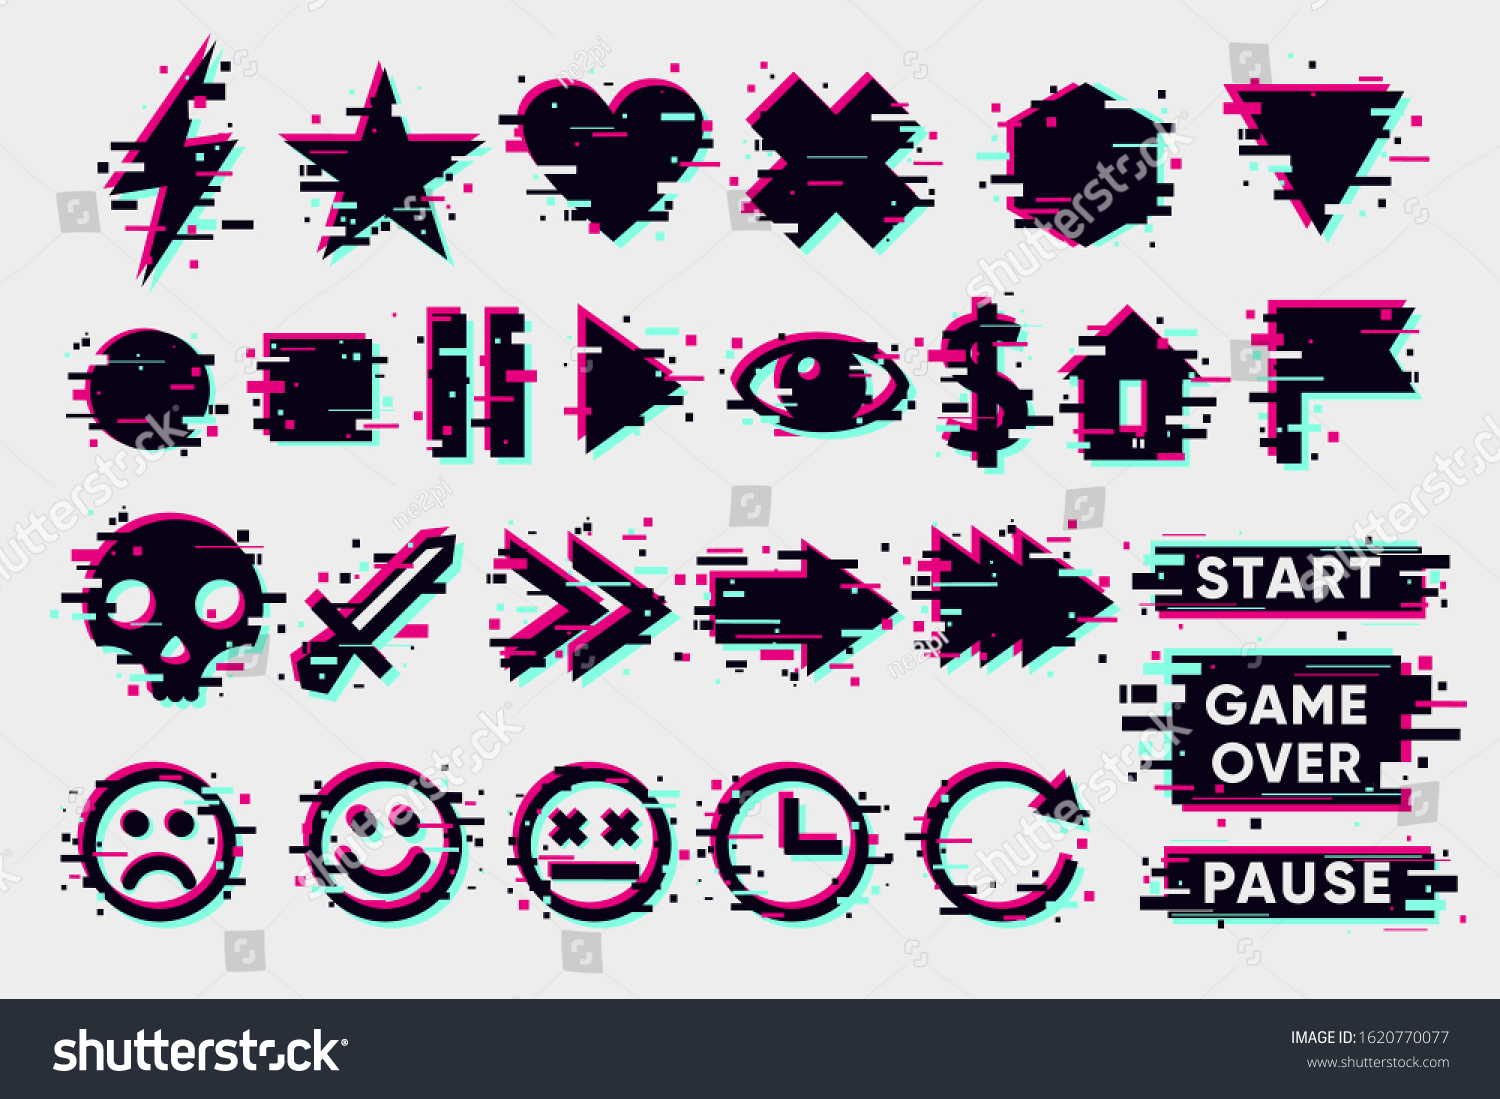 SVG of Glitch icons set. Interface navigation elements with glitchy effect. Vector signs collection on white background. Game design elements. svg